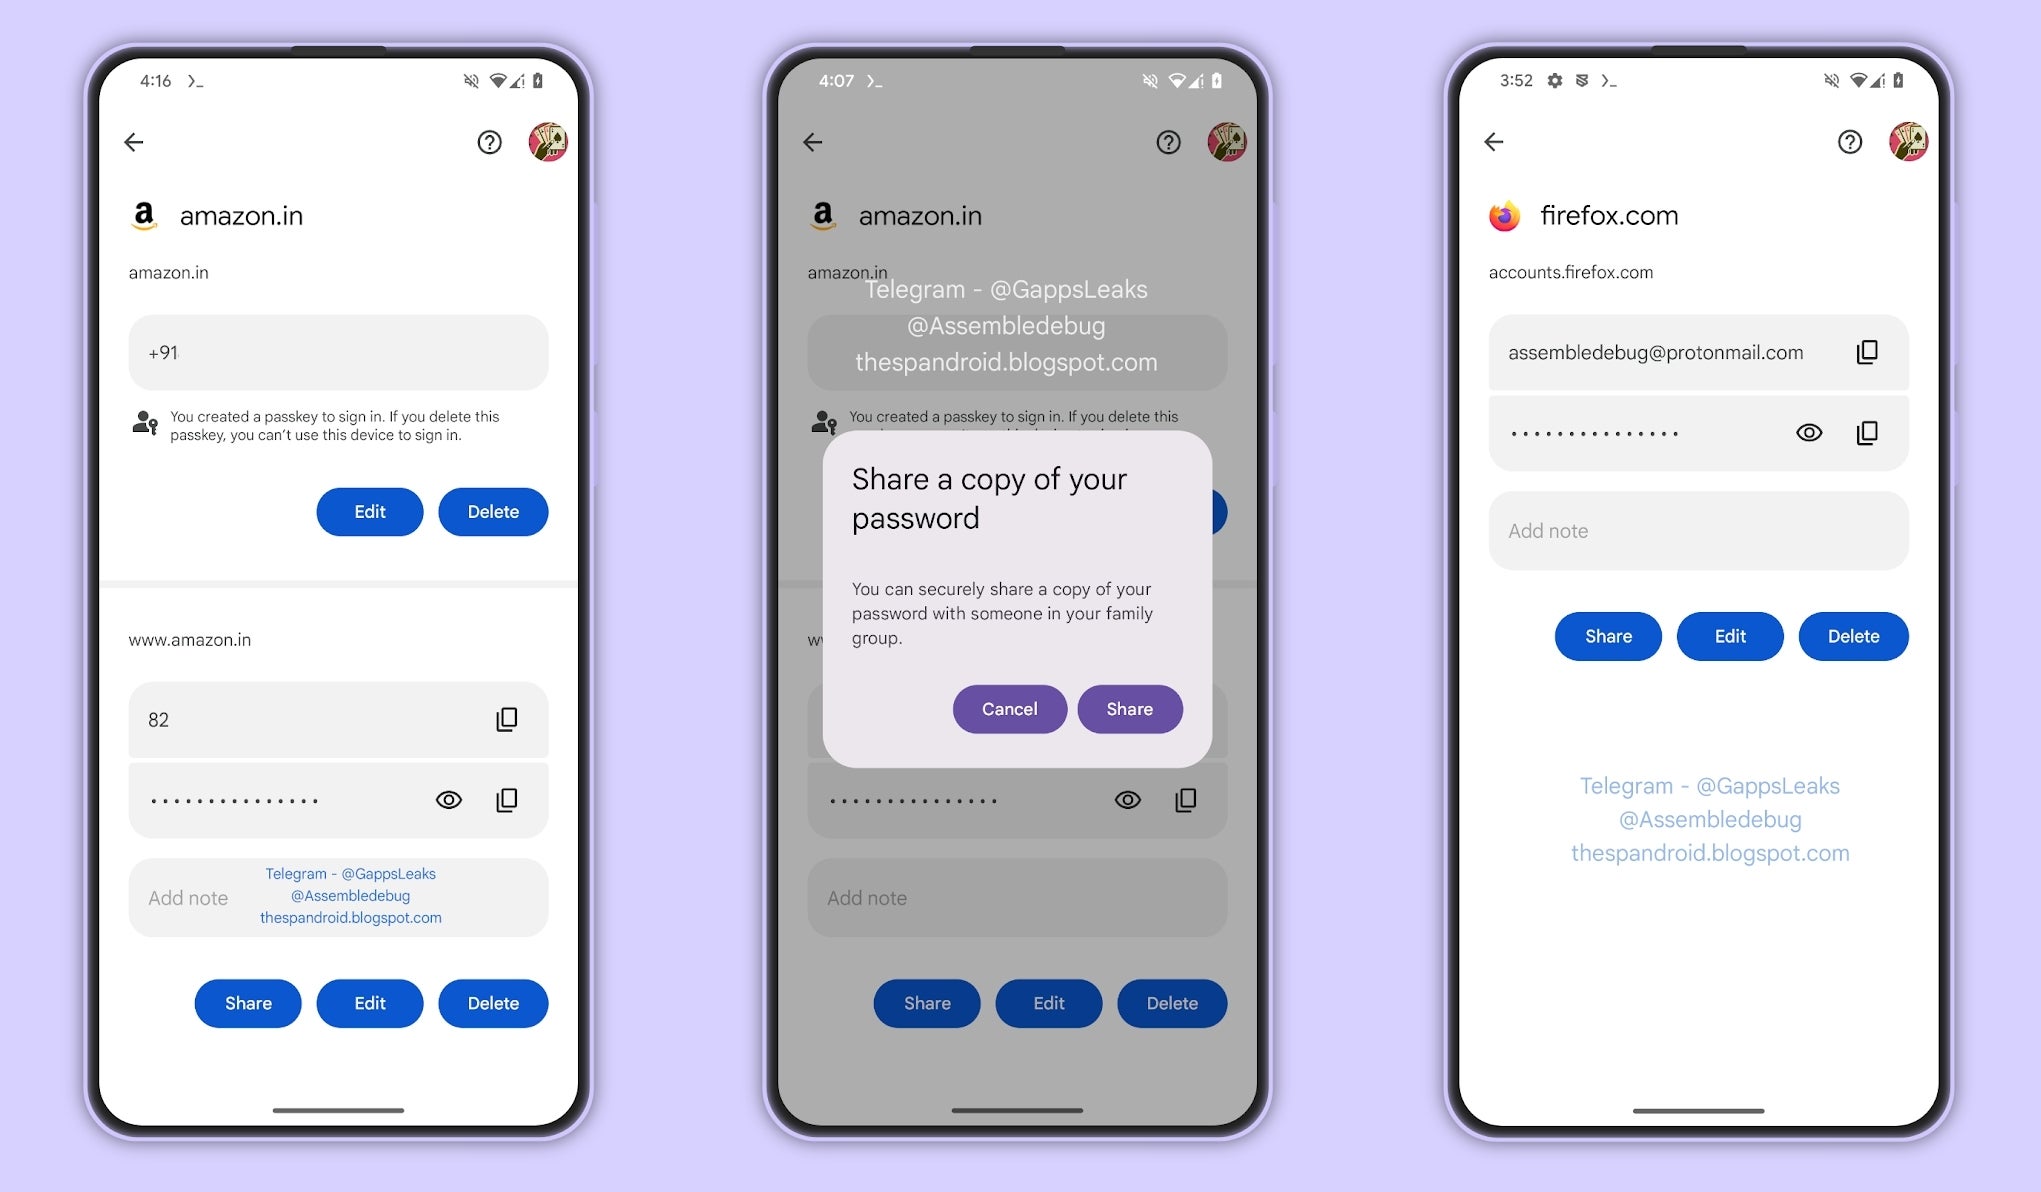 Google Password Manager on Android could soon let you share passwords securely with your family